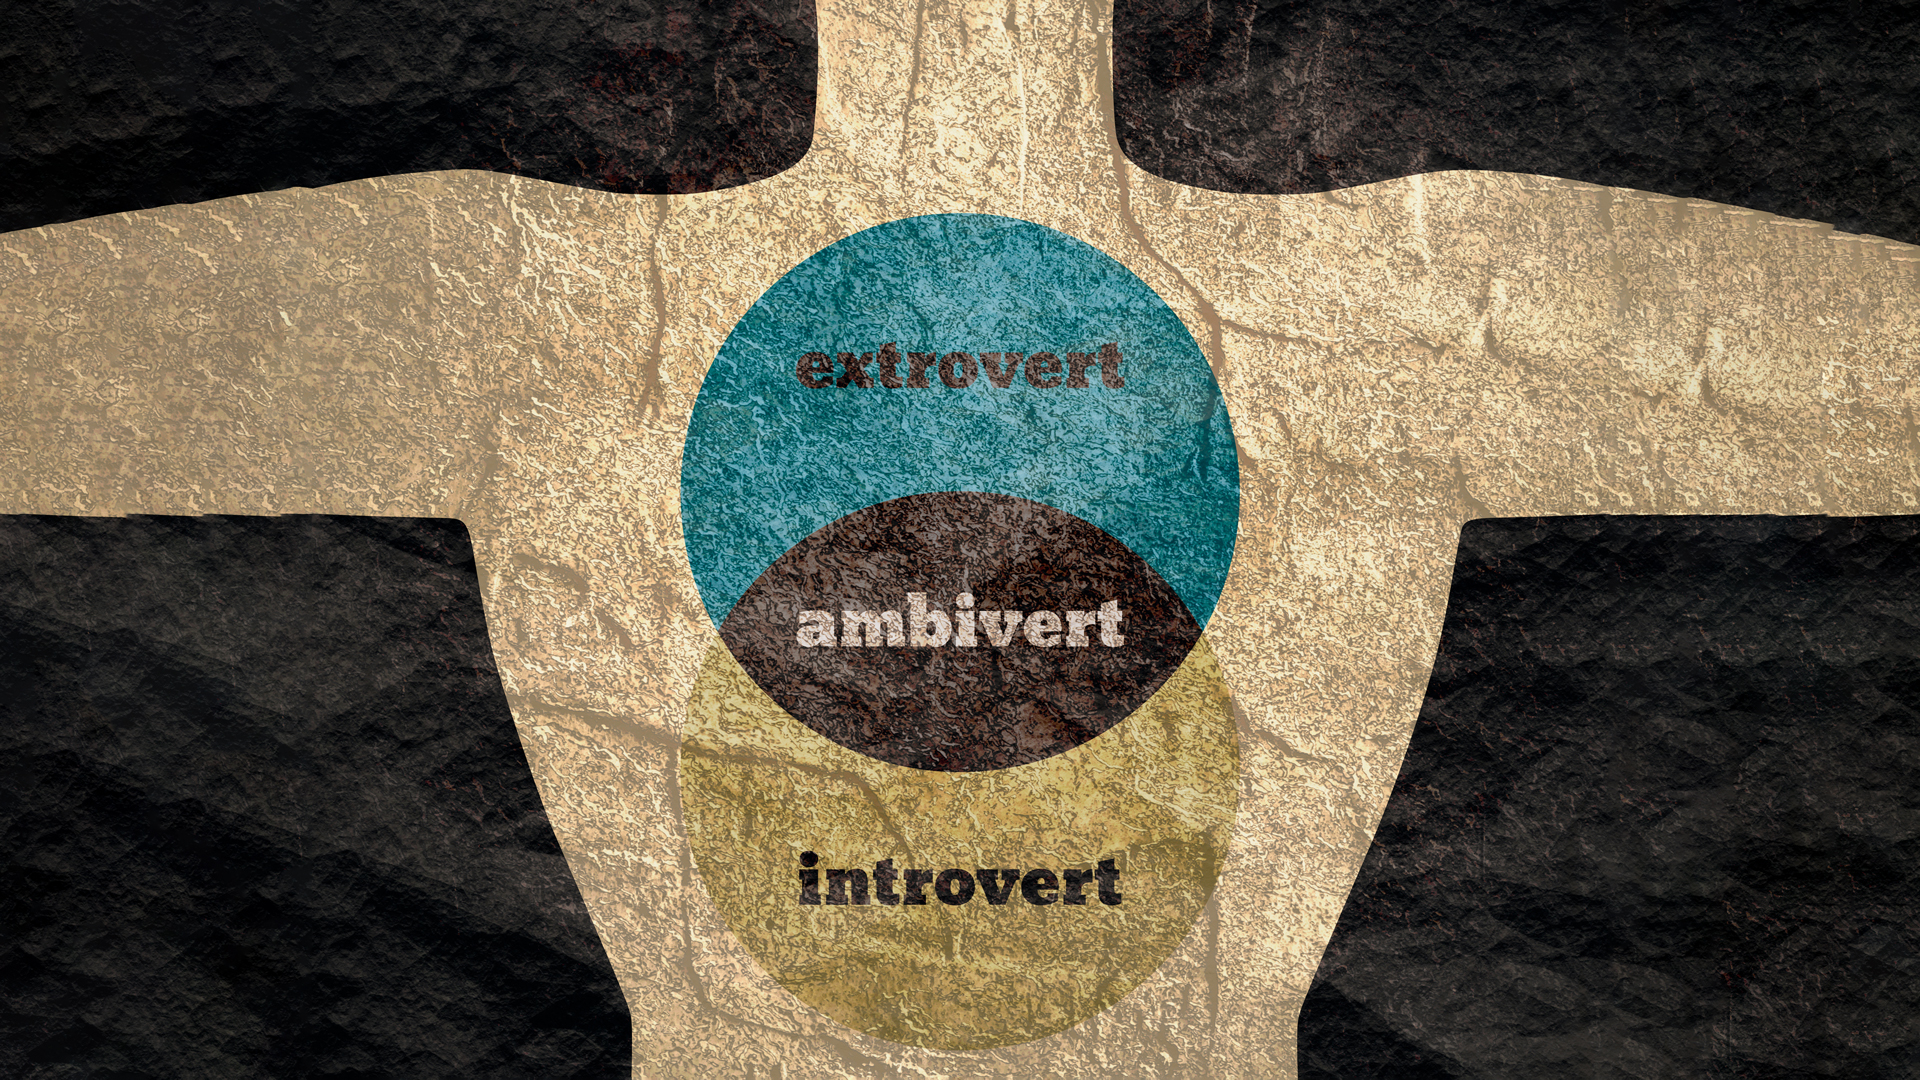 What’s an ambivert, and does it matter?